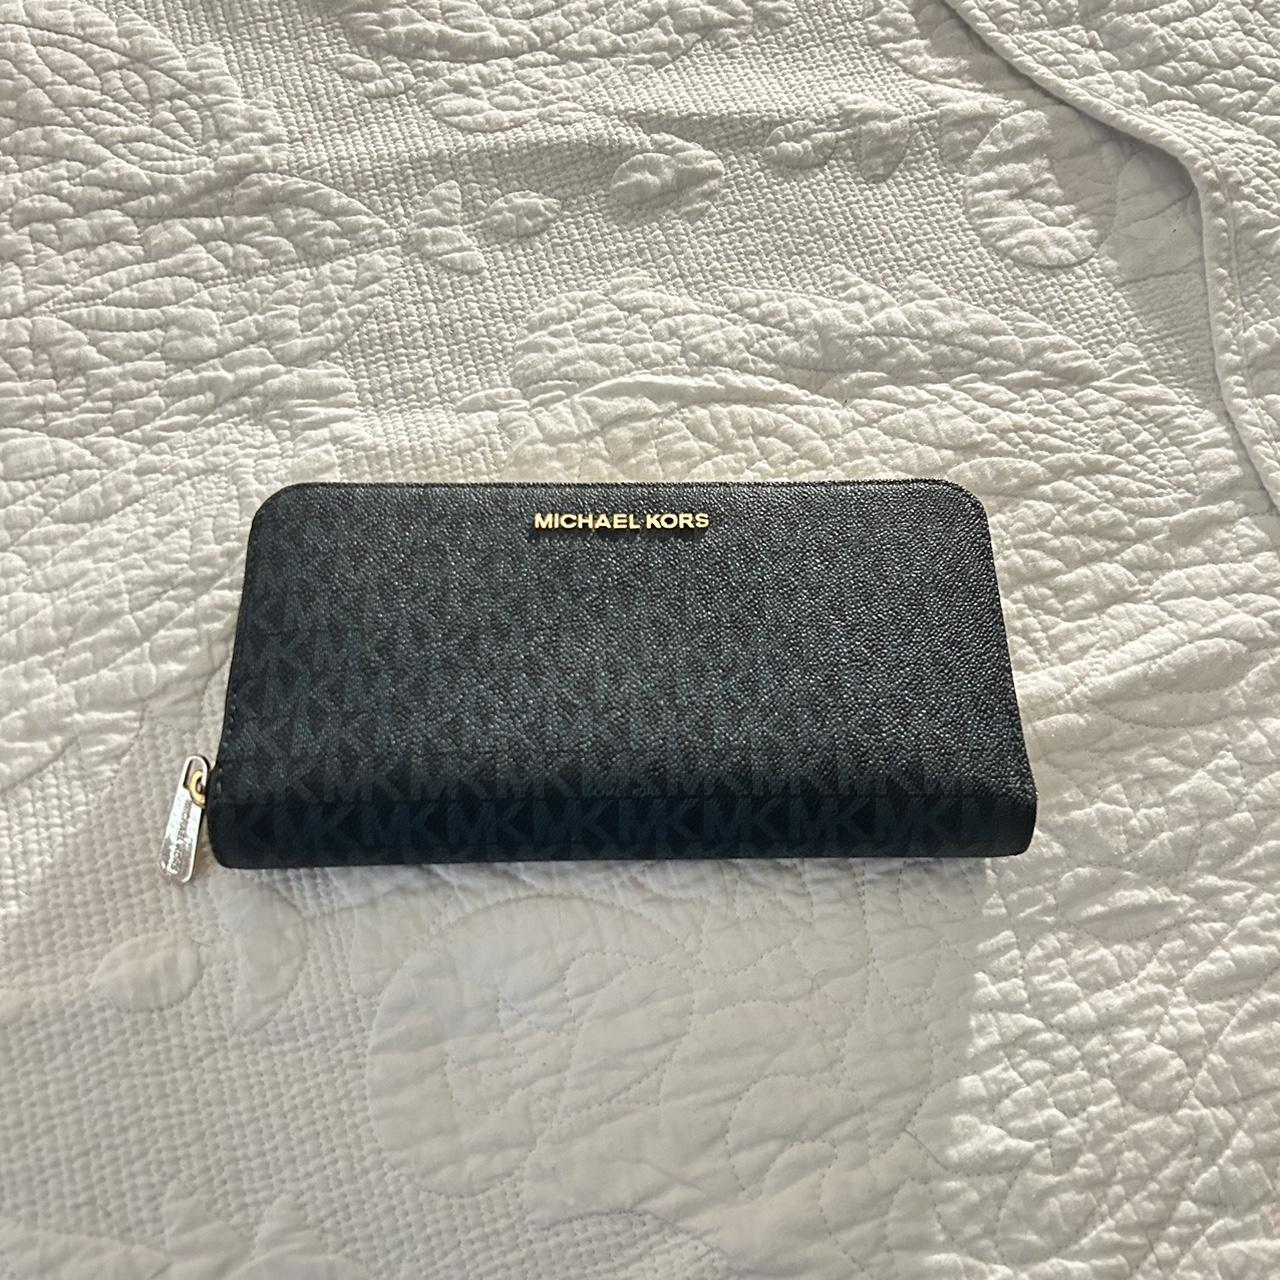  Original Michael Kors Wallet Womens Fashion Bags  Wallets Wallets   Card holders on Carousell